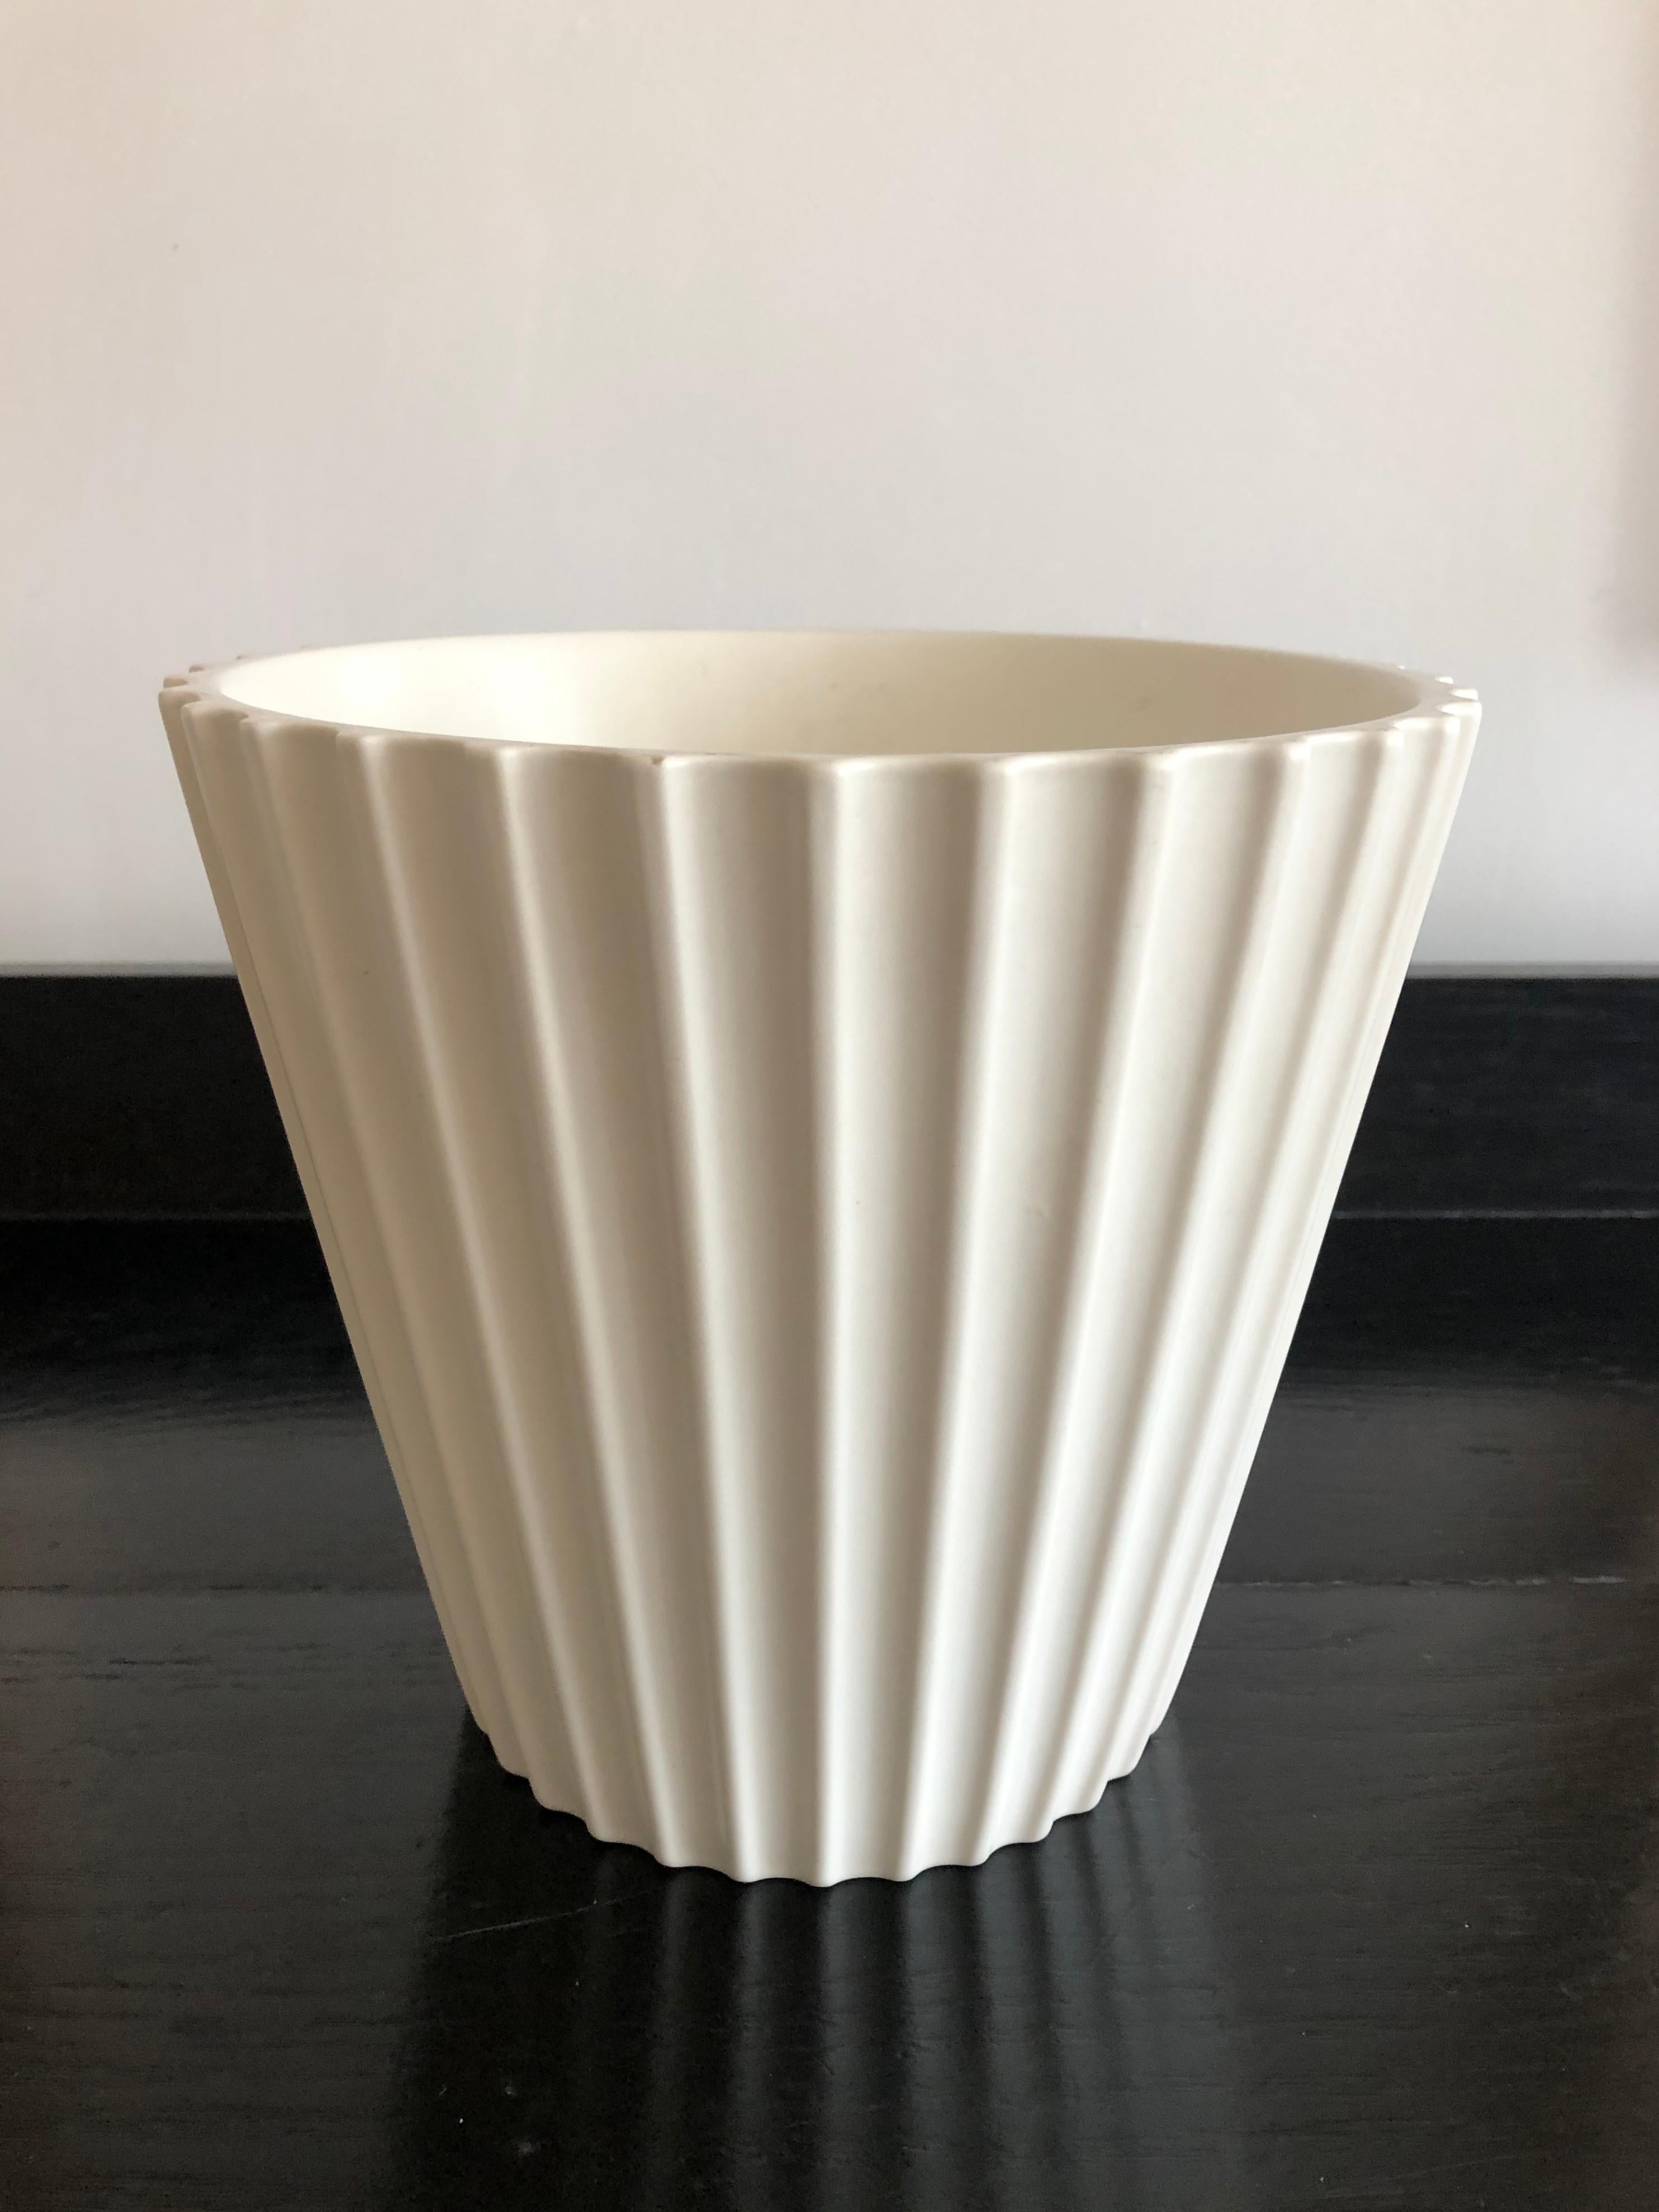 An Art Deco period white moonstone glazed vase or wine cooler, designed by Keith Murray for Wedgwood, English, circa 1930s, of tapering circular form with reeded. Signed with printed mark and paper collectors' inventory number label. We love this